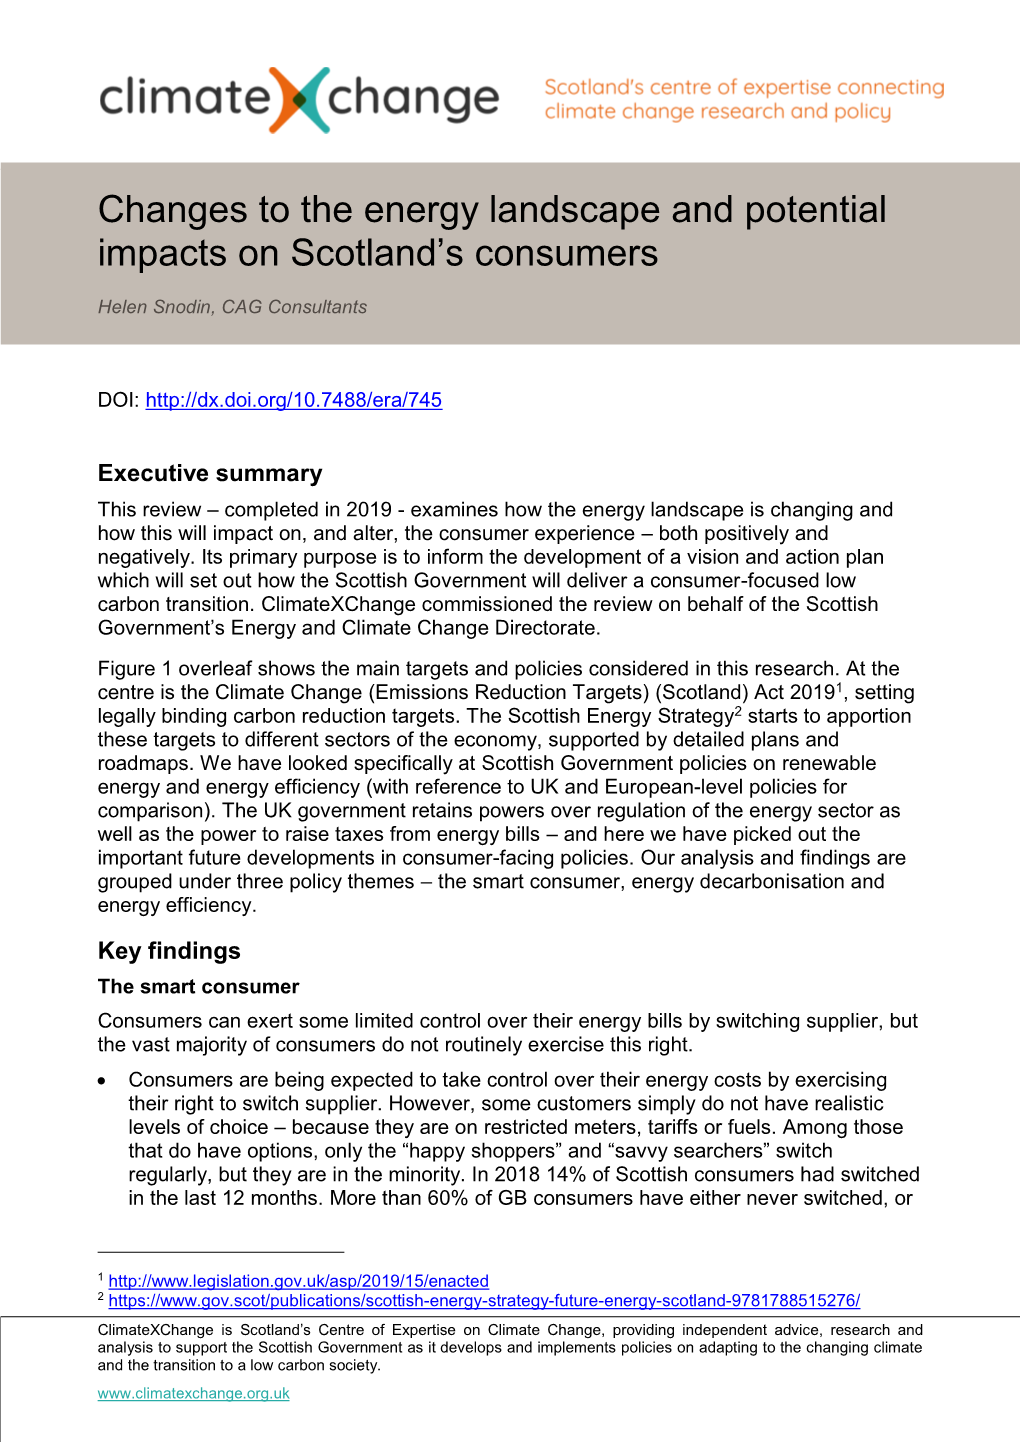 Changes to the Energy Landscape and Potential Impacts on Scotland's